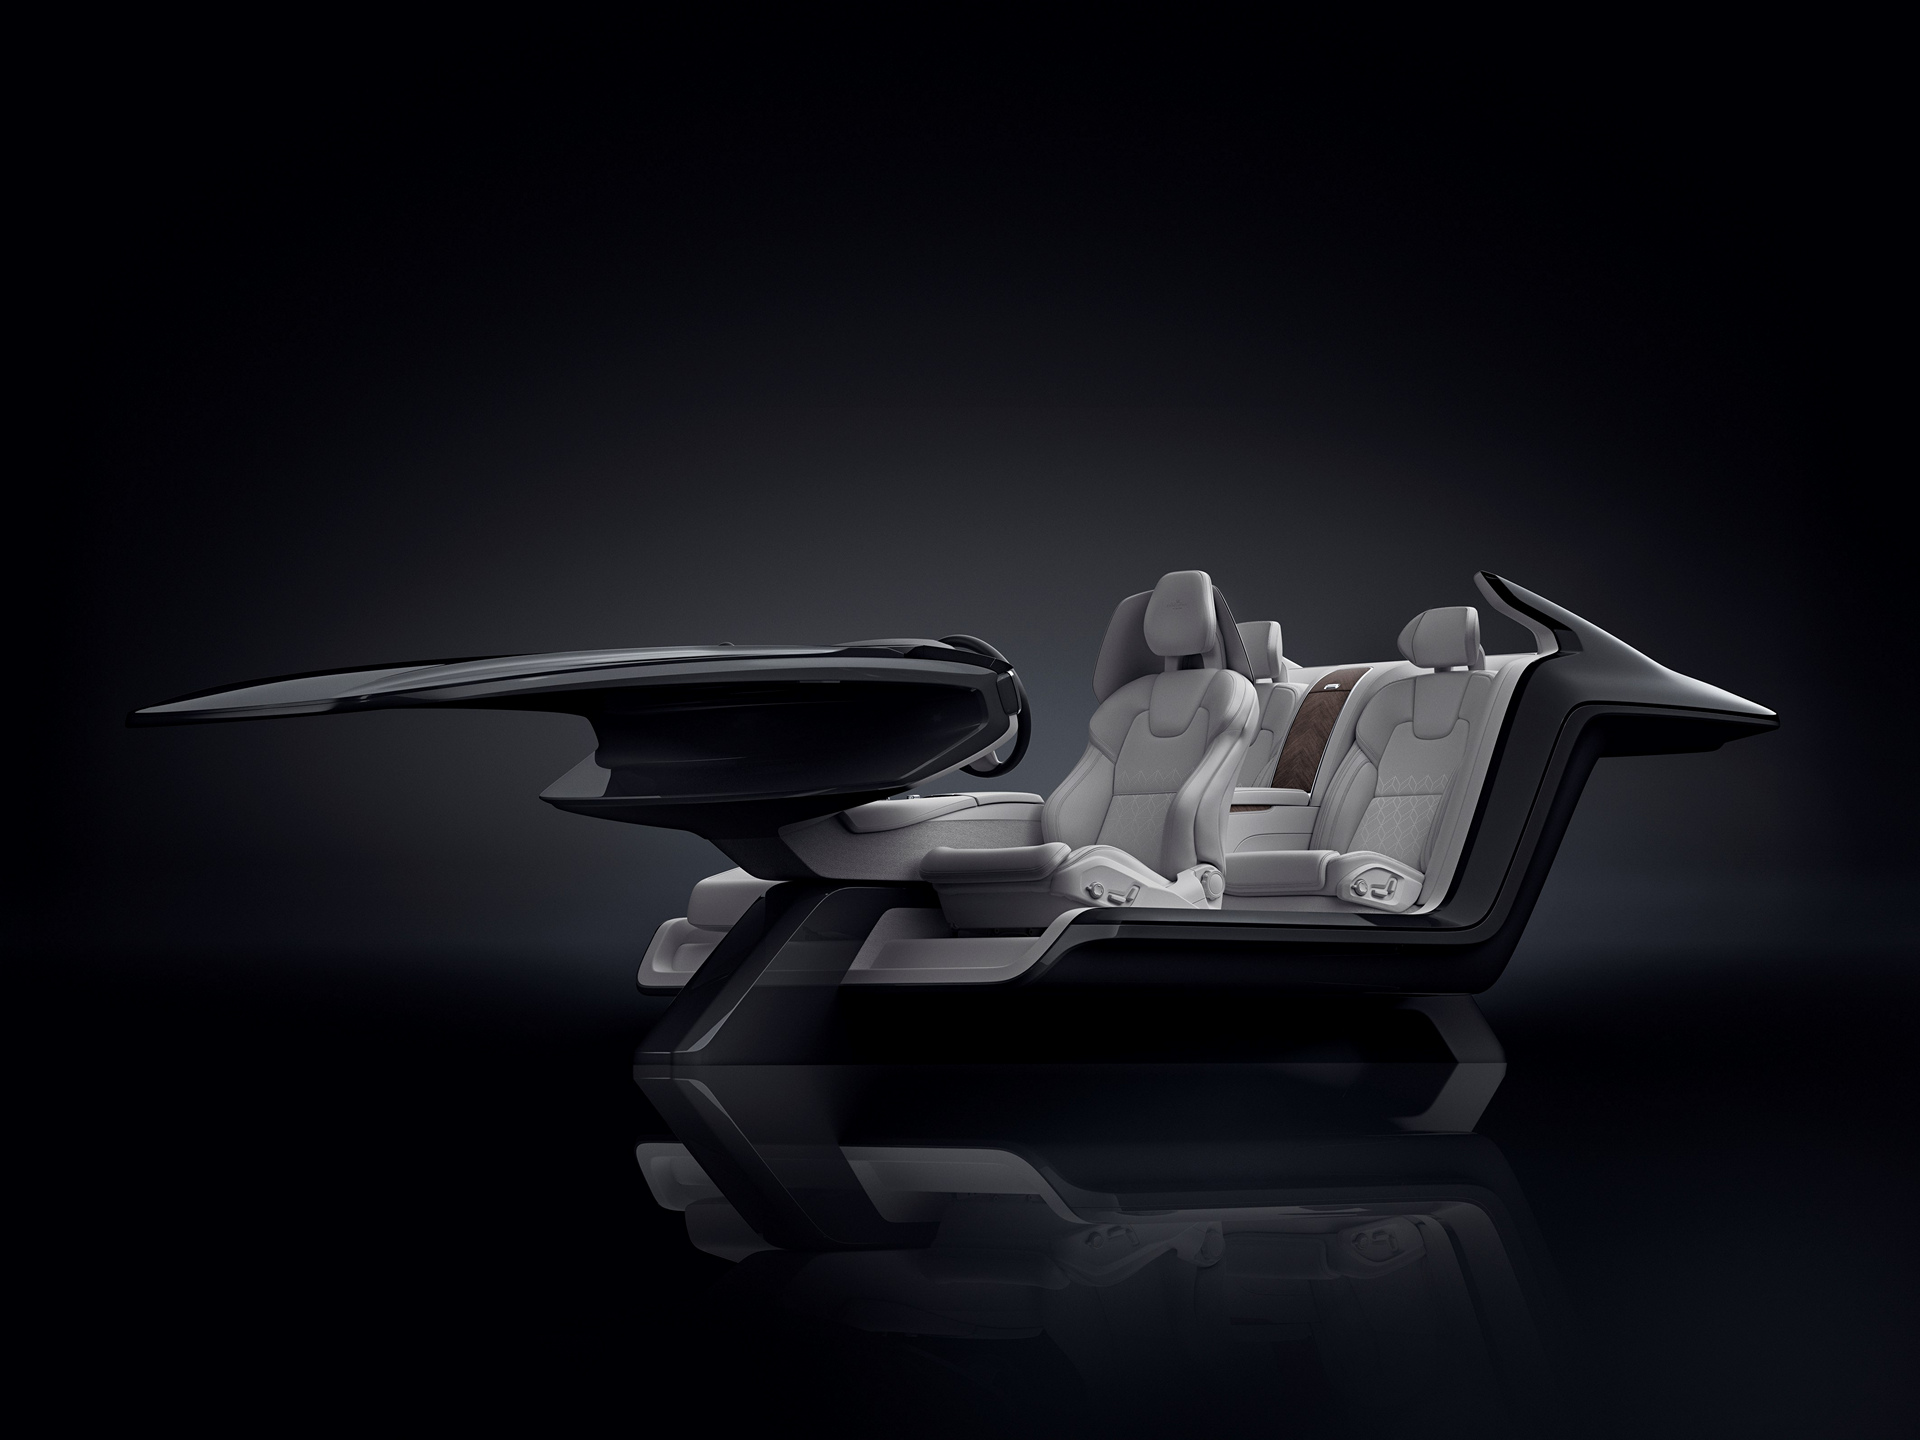 Volvo S90 Excellence Interior Concept © Zhejiang Geely Holding Group Co., Ltd